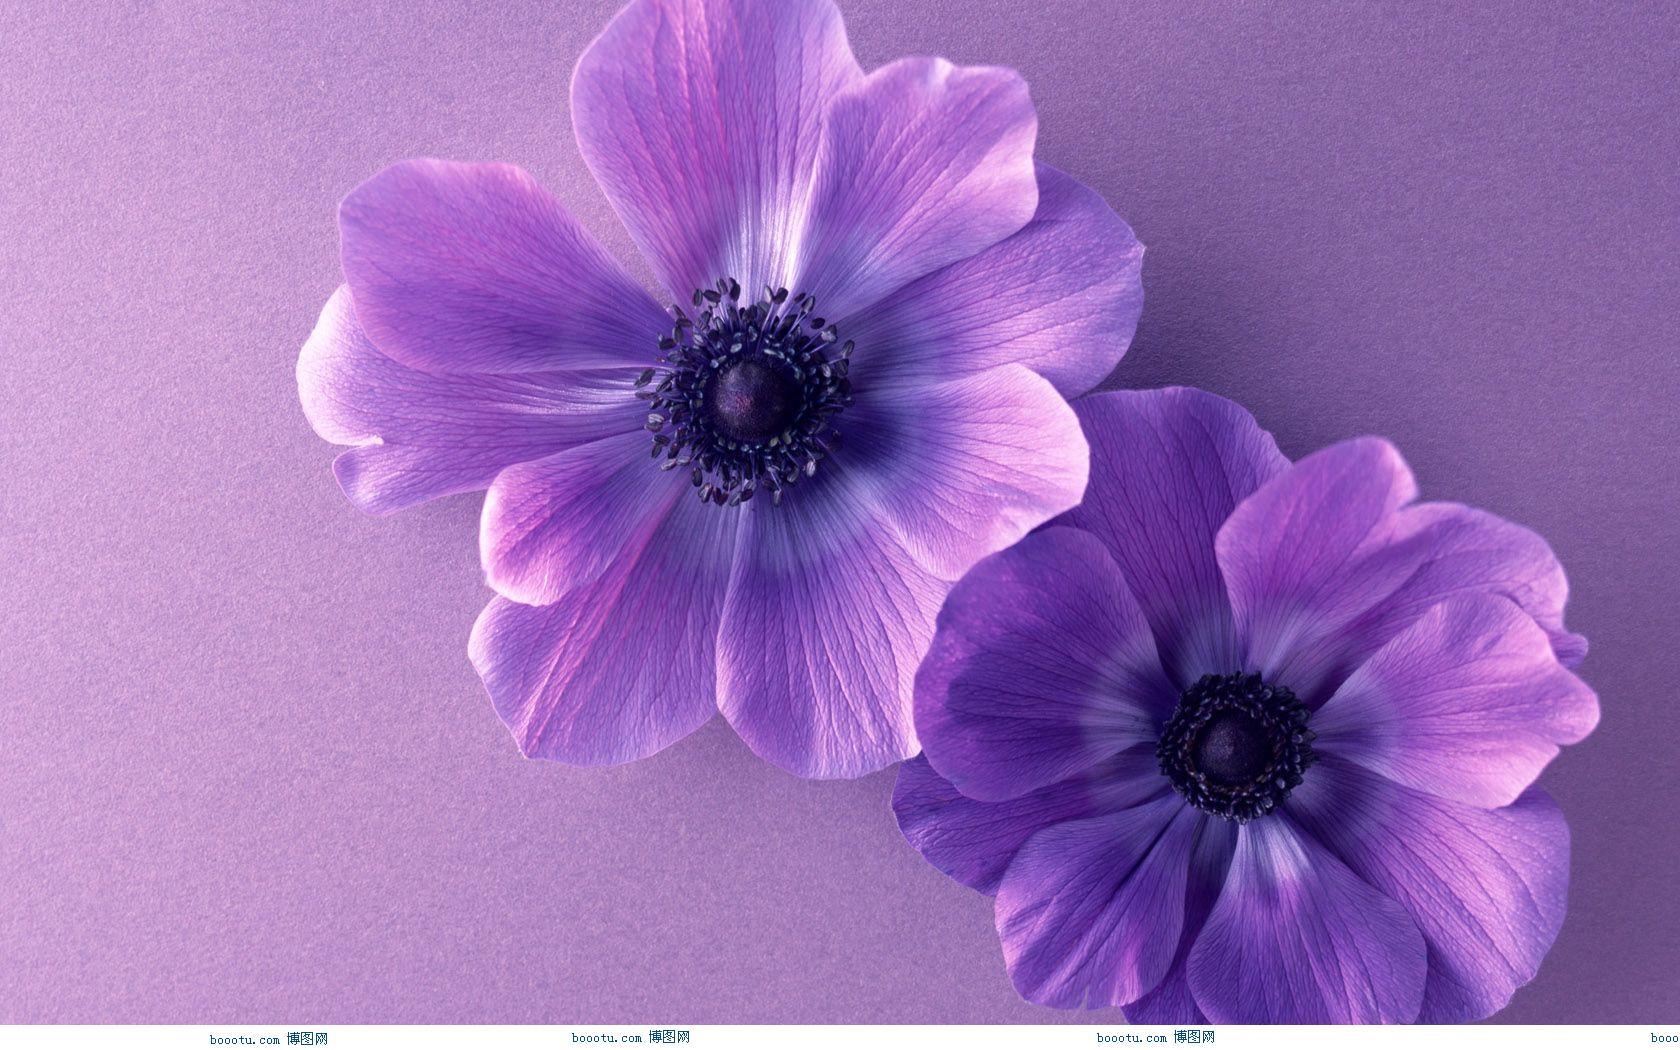 Ultra HD Purple Image Collection for Desktop for PC & Mac, Tablet